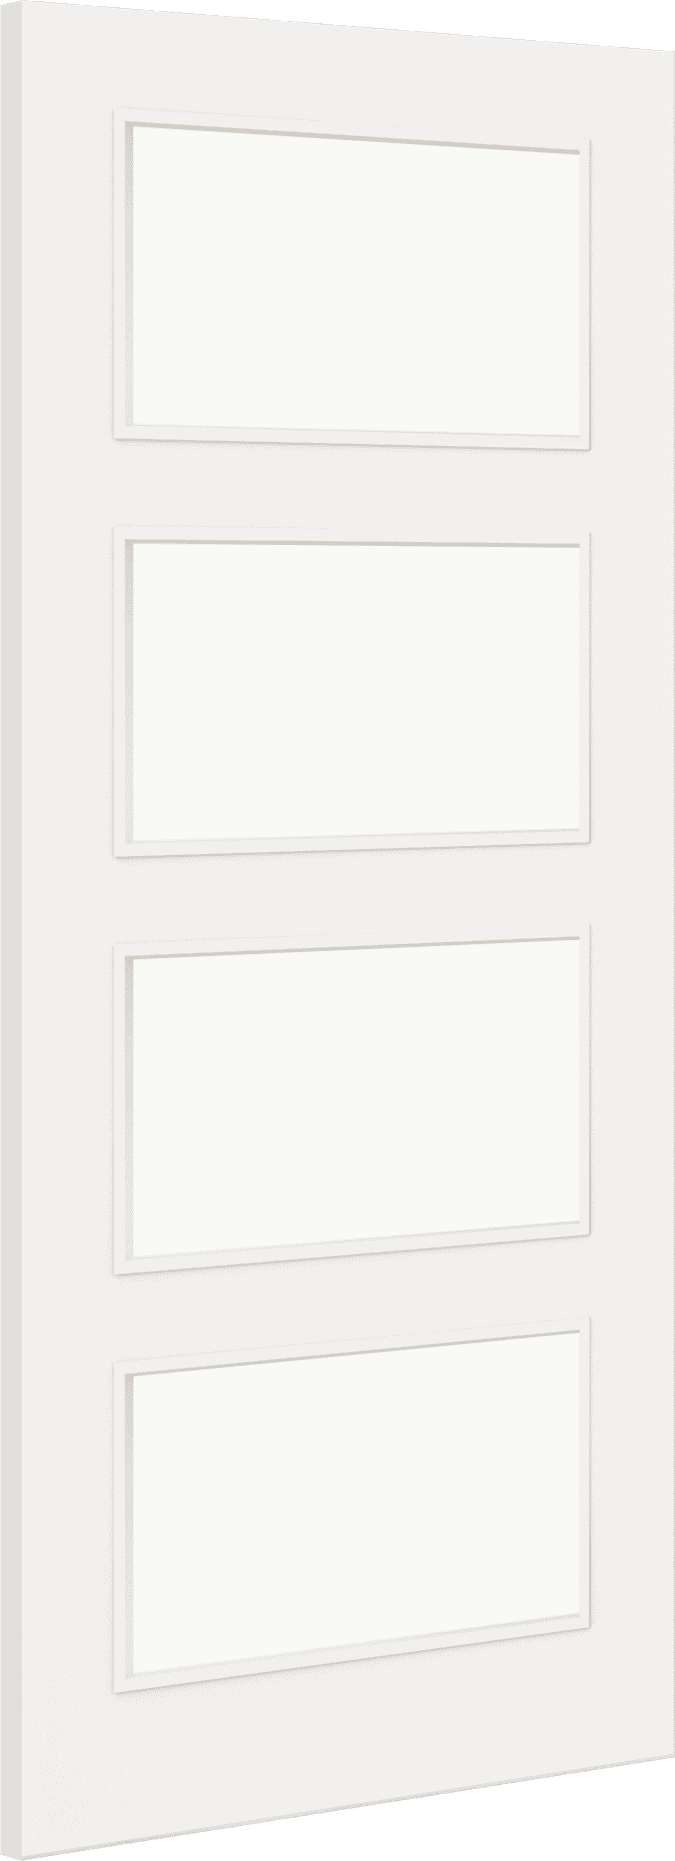 1981mm x 838mm x 44mm (33") Architectural Paint Grade White 04 Clear Glazed Fire Door Blank